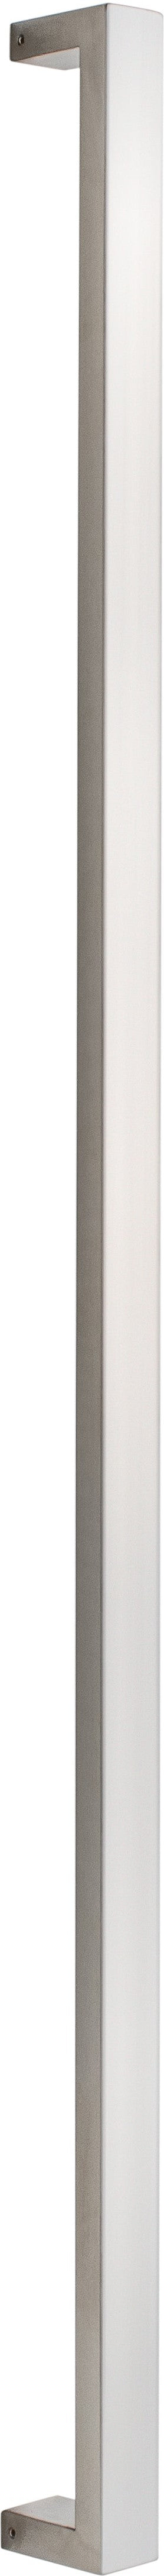 Sure-Loc 48" Square Long Door Pull, Single-Sided in Satin Stainless Steel finish